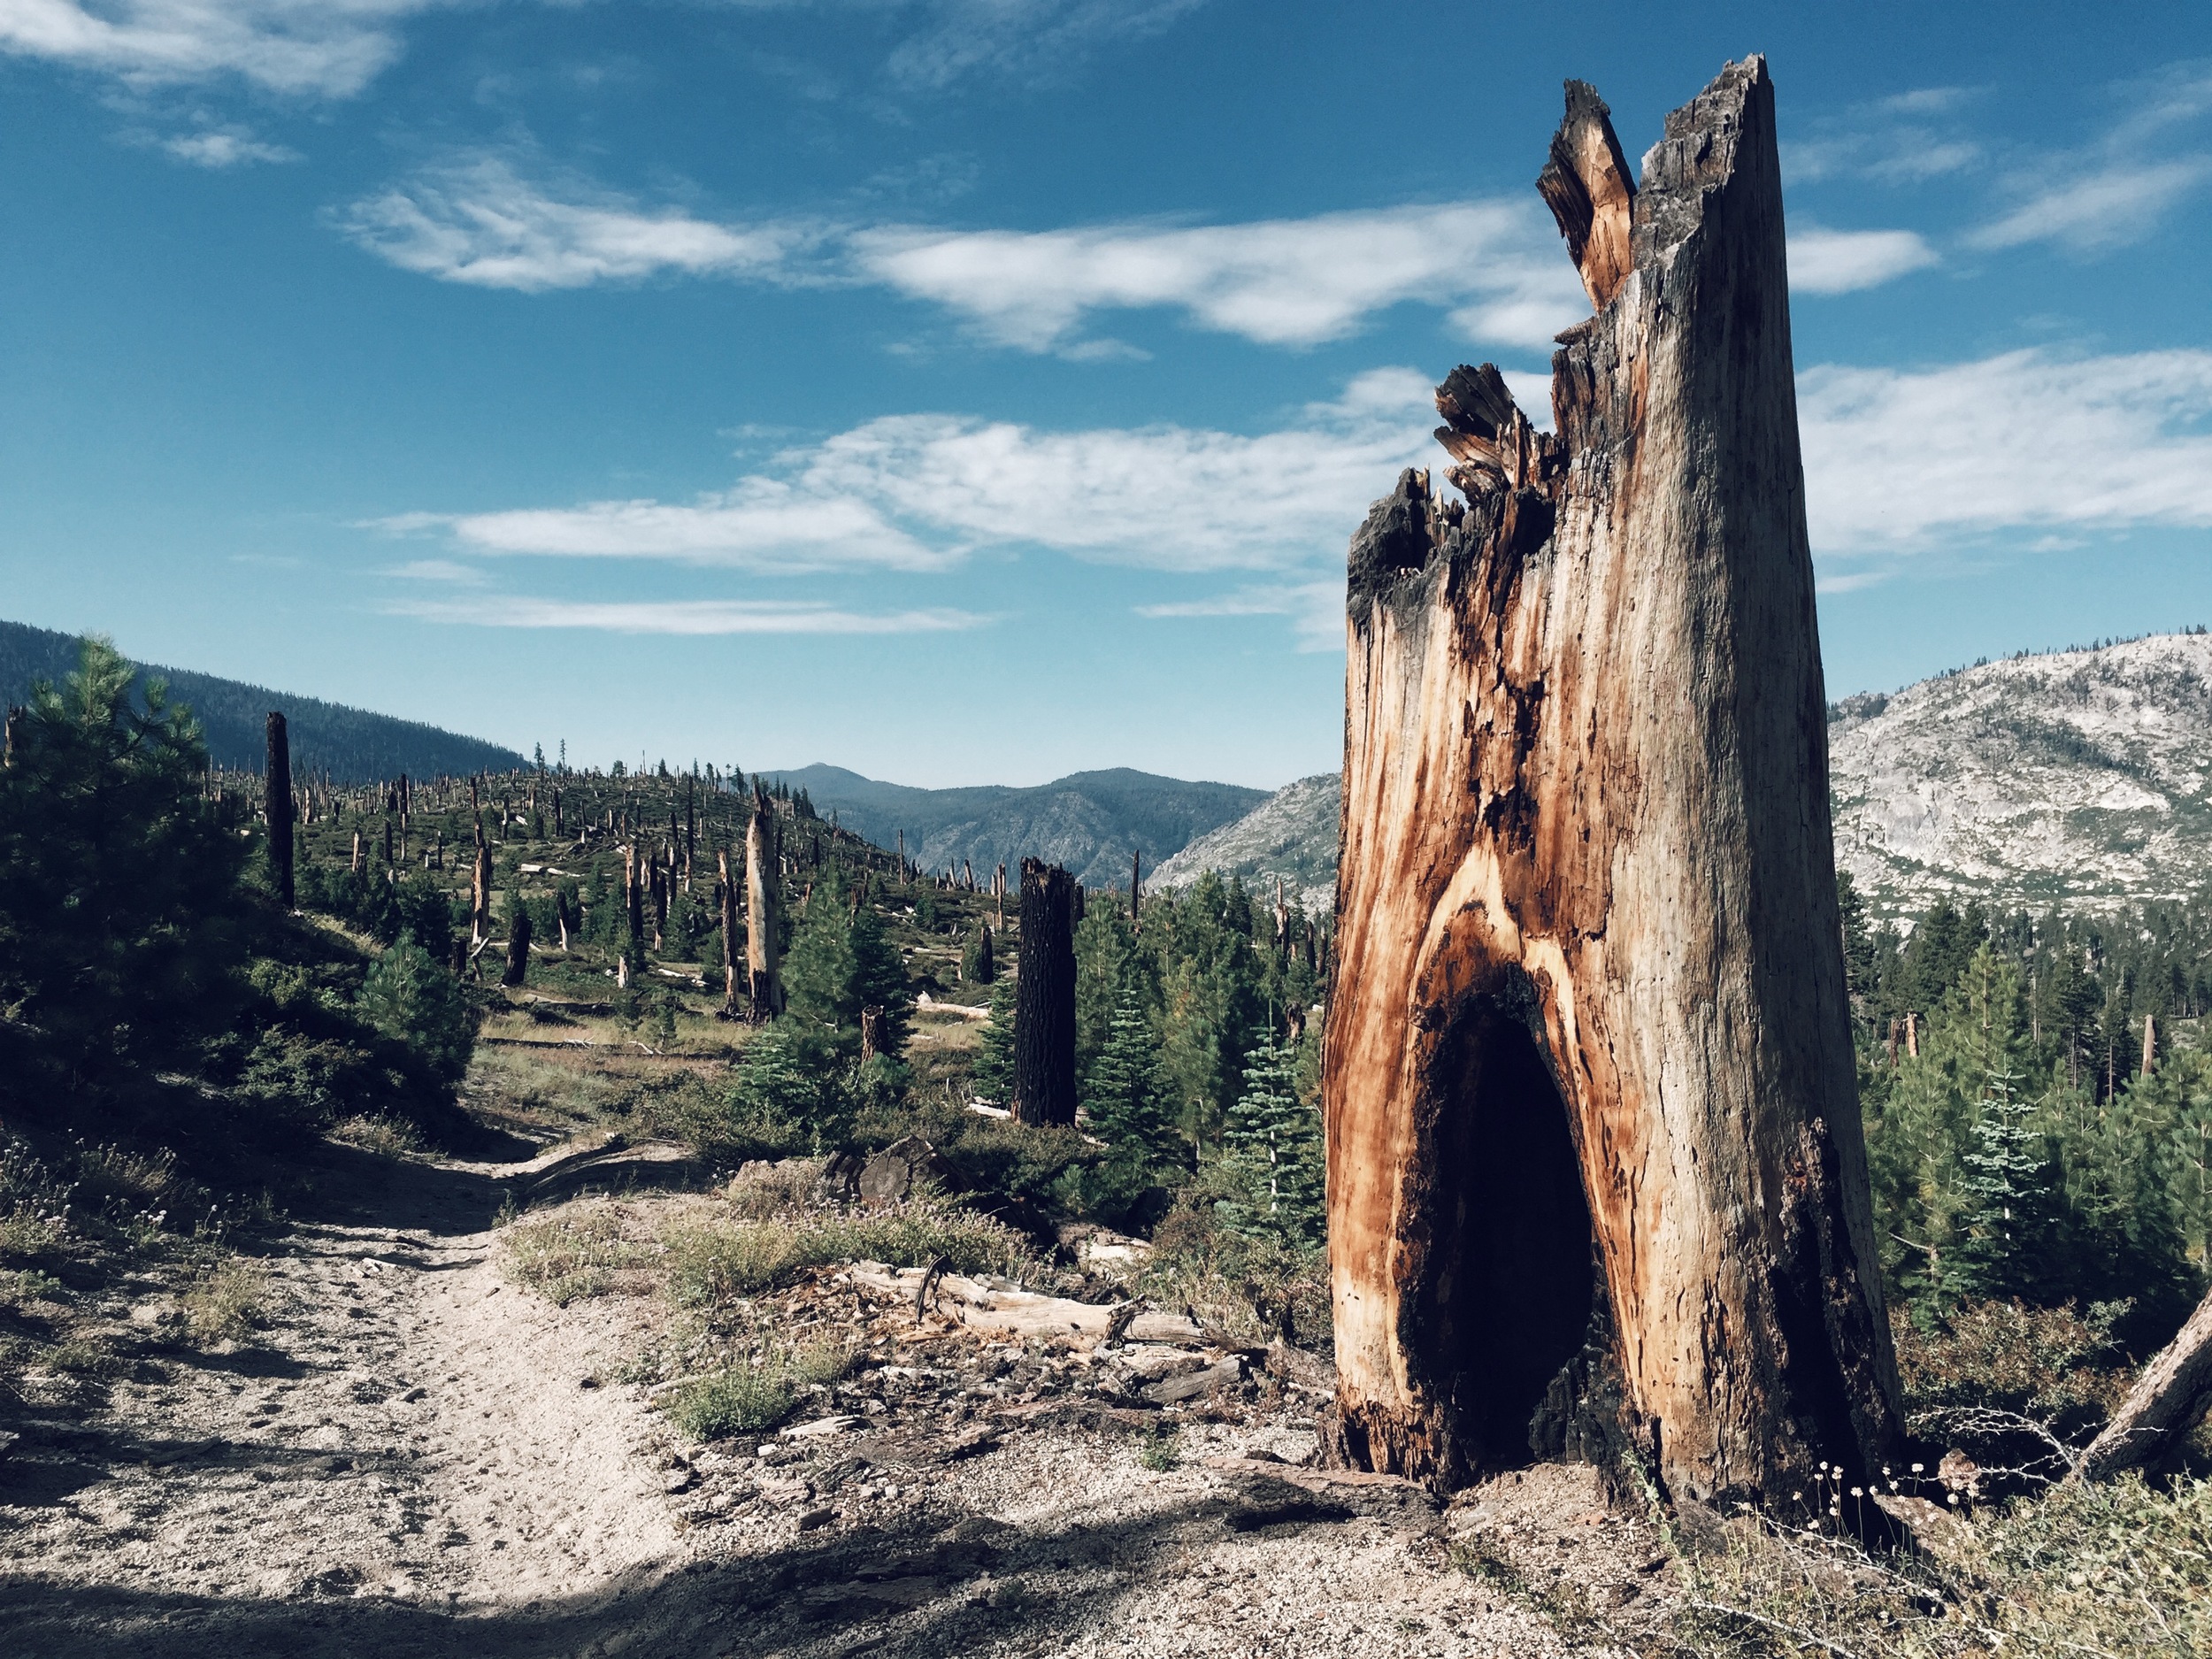  The forest around Devil's Postpile National Monument still shows devastation from the 1992 Rainbow Fire. 